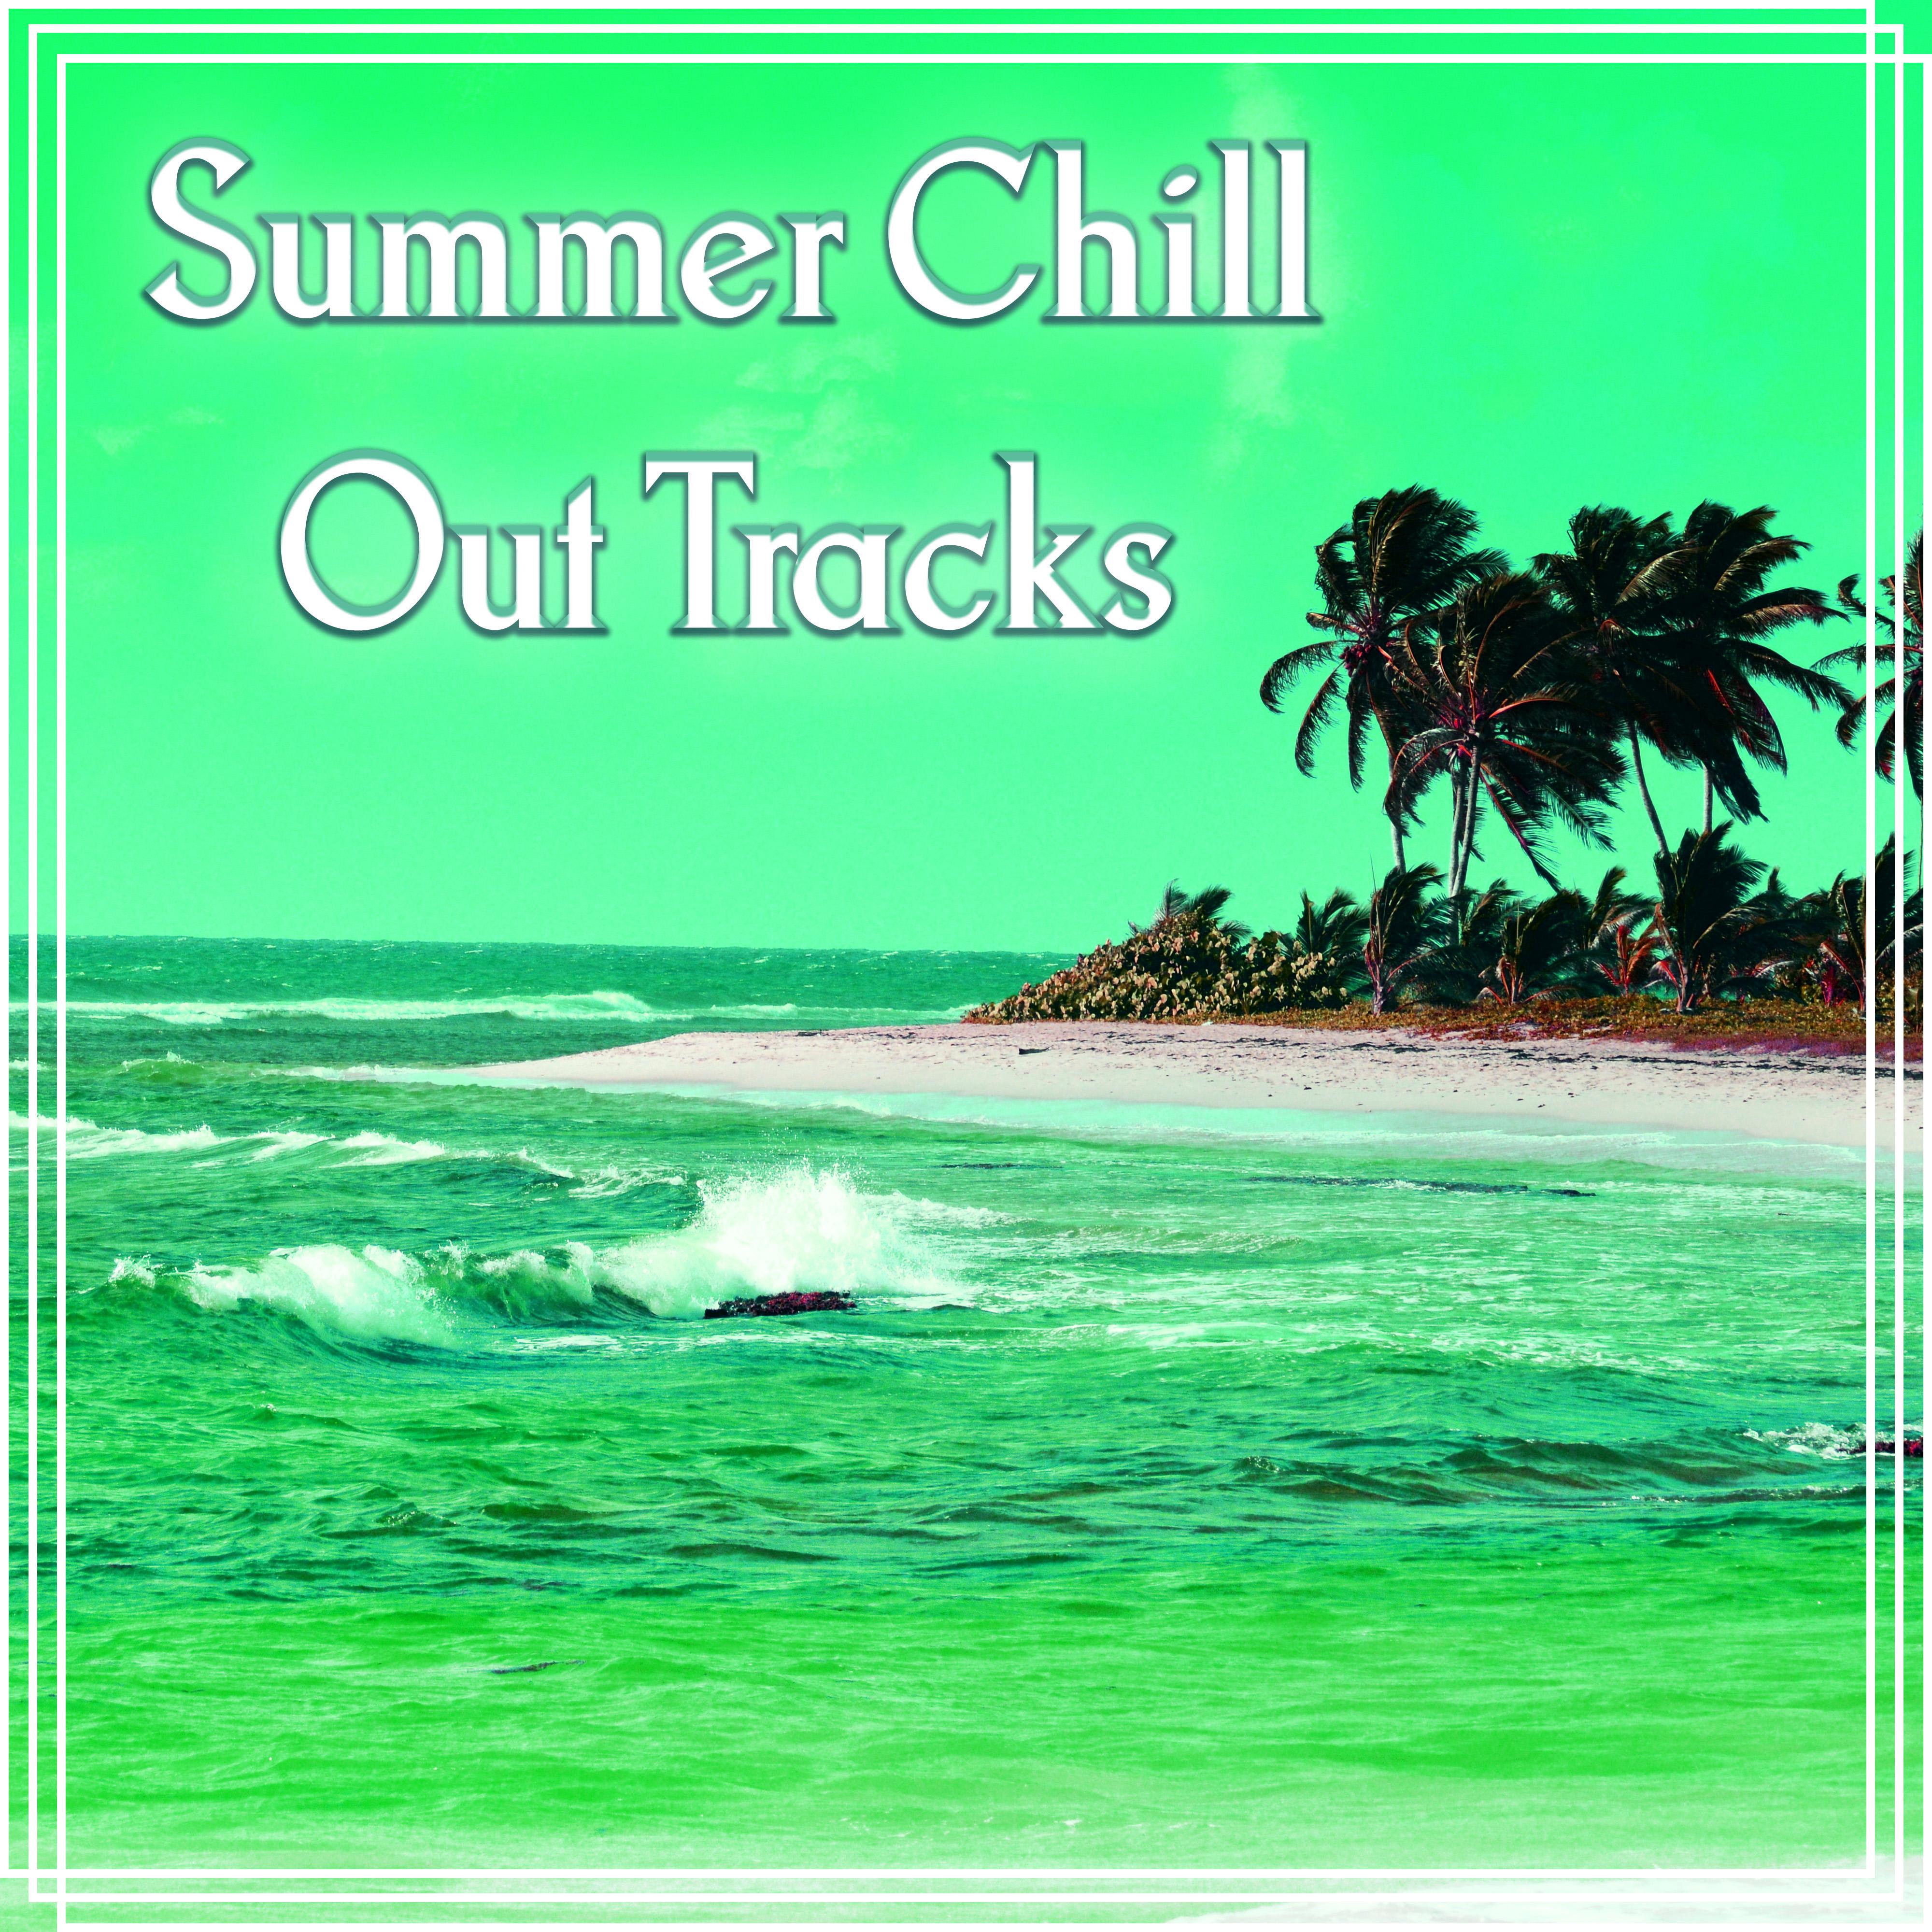 Summer Chill Out Tracks – Chill Tone, Chillex, Summer Relax, Ambient Lounge, Chill Out Music, Lounge Summer